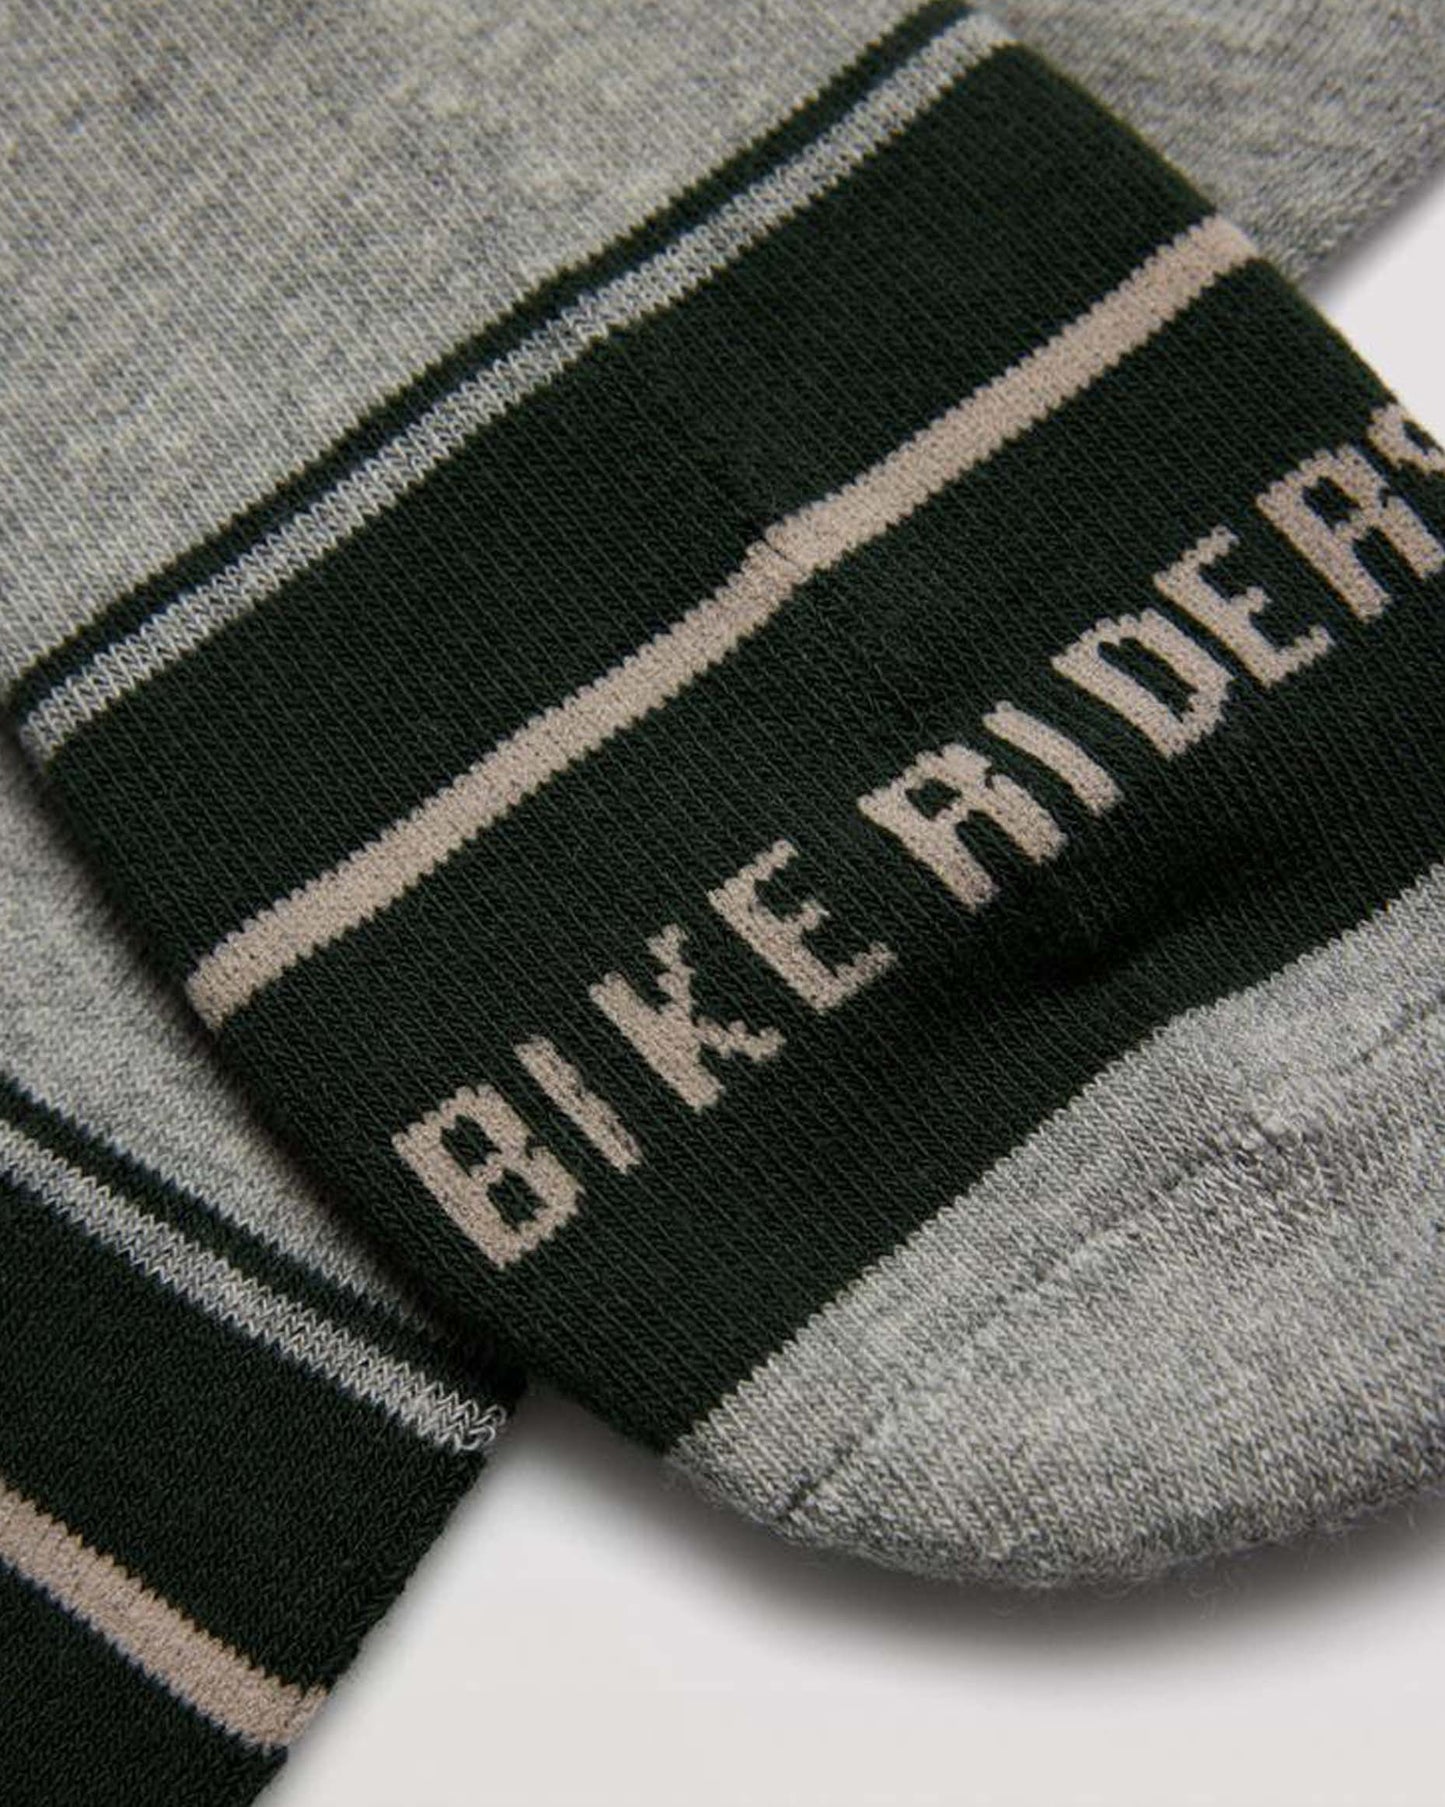 Light grey men's thick and warm terry lined thermal cotton with the text "bike riders club" on the toe.